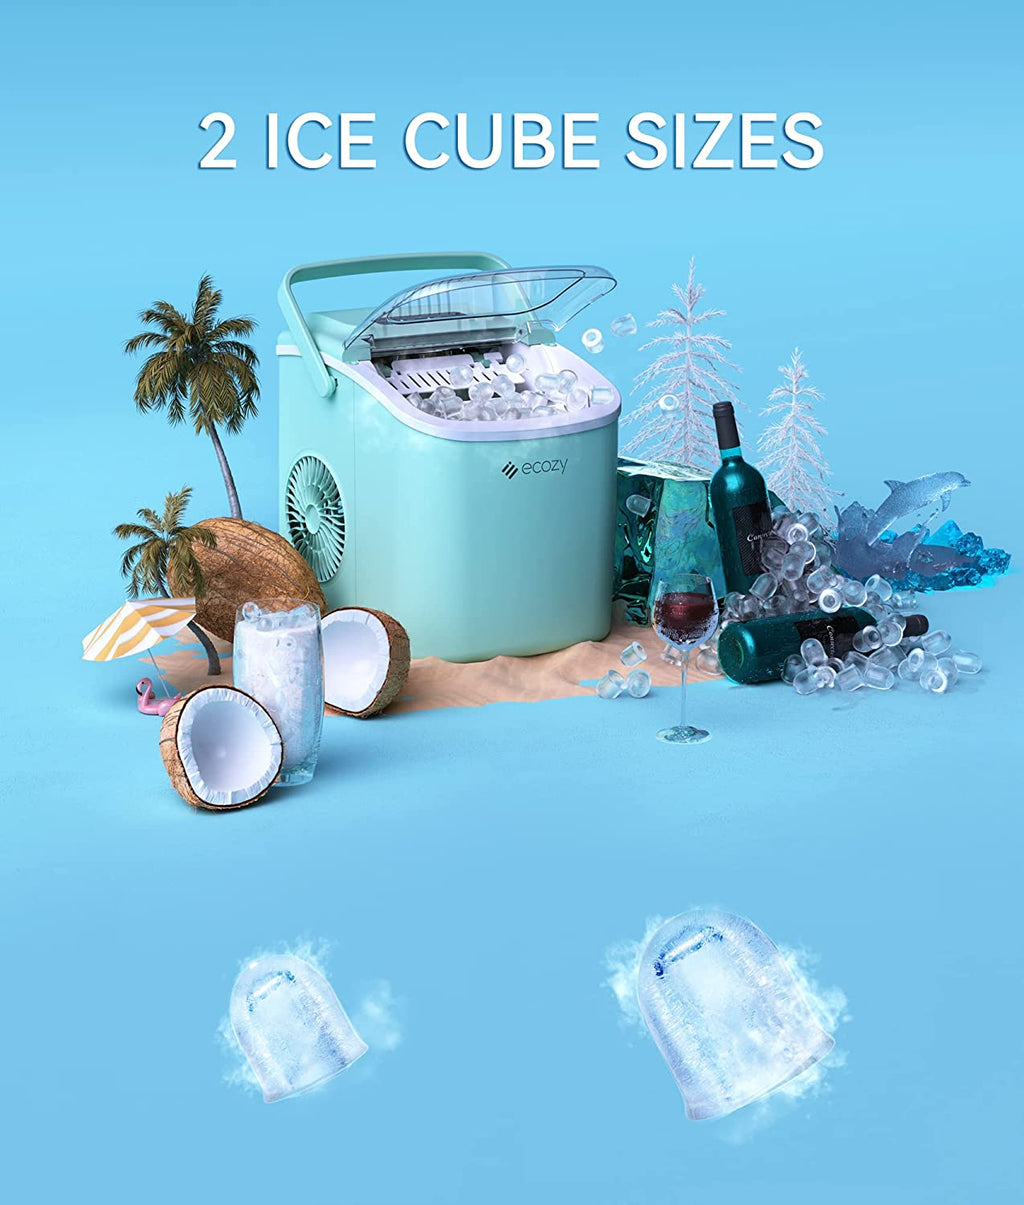 ecozy Portable Ice Maker Countertop, 9 Cubes Ready in 6 Mins, 26 lbs i